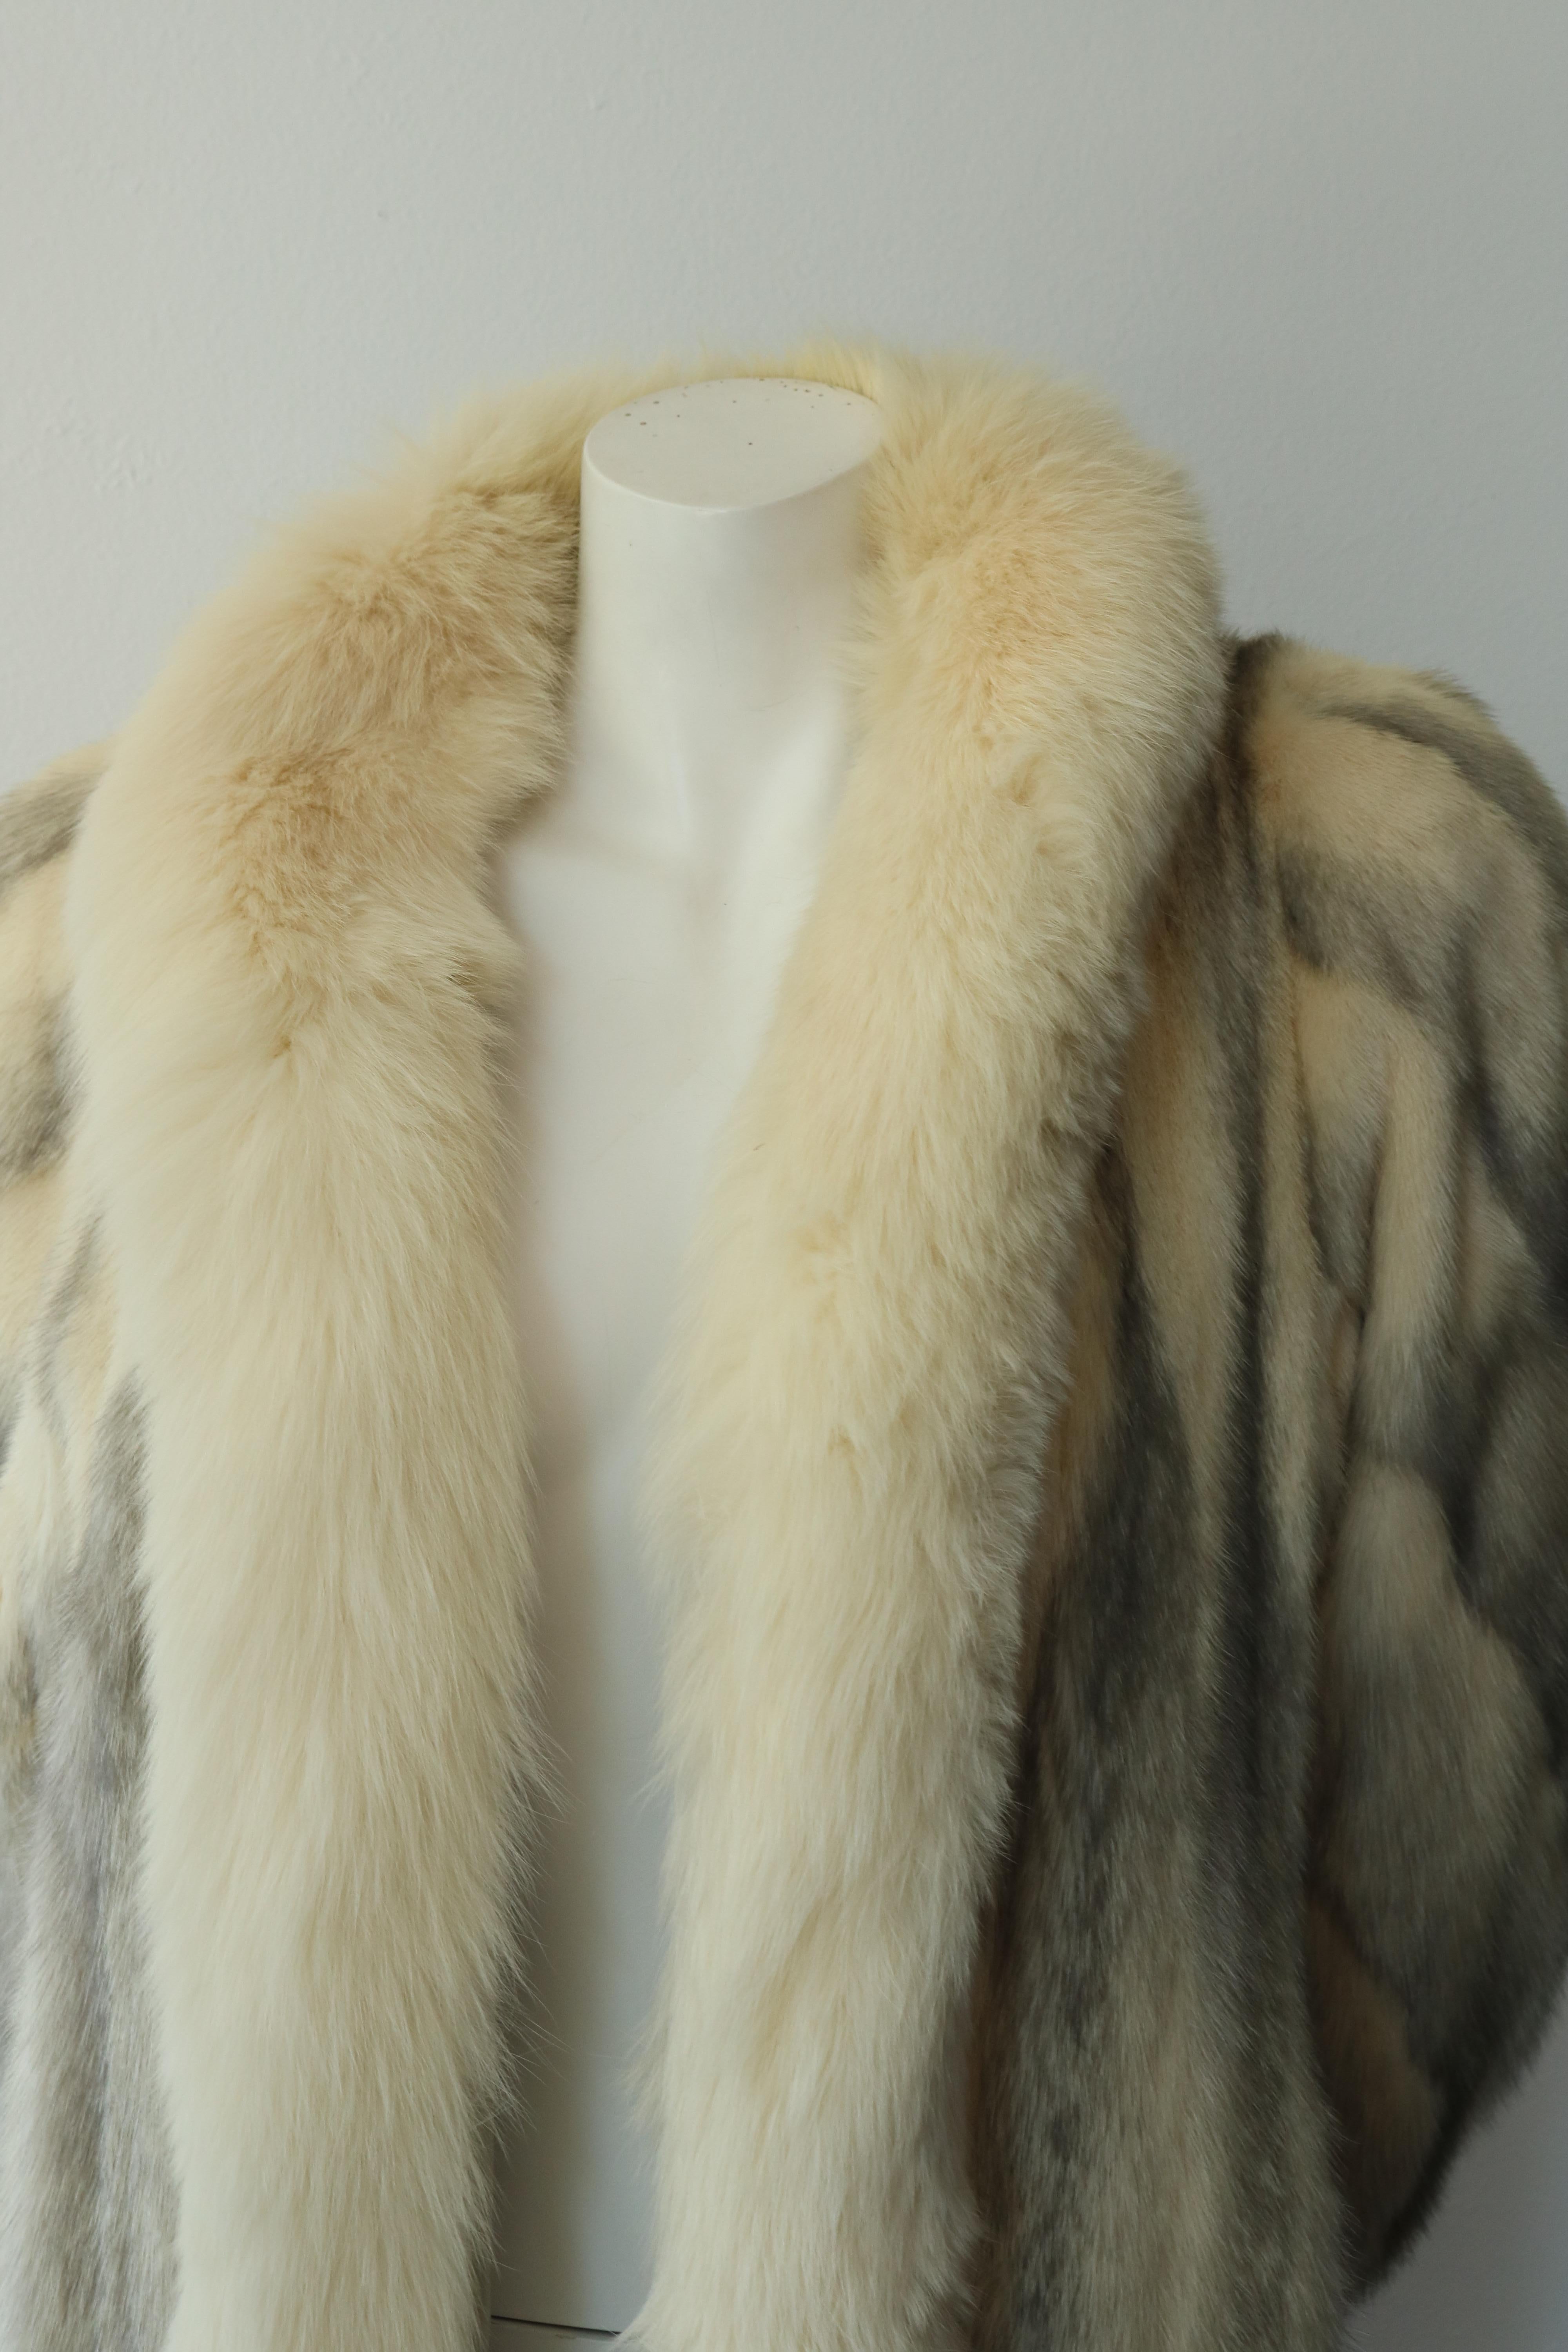 -Gorgeous, full length, vintage Christian Dior Fur Coat 
-White and Grey in color 
-Embroidered in the inside with previous owner's name
-circa 1980s
-Some minor imperfections on the inside lining, but overall amazing condition and a one of kind